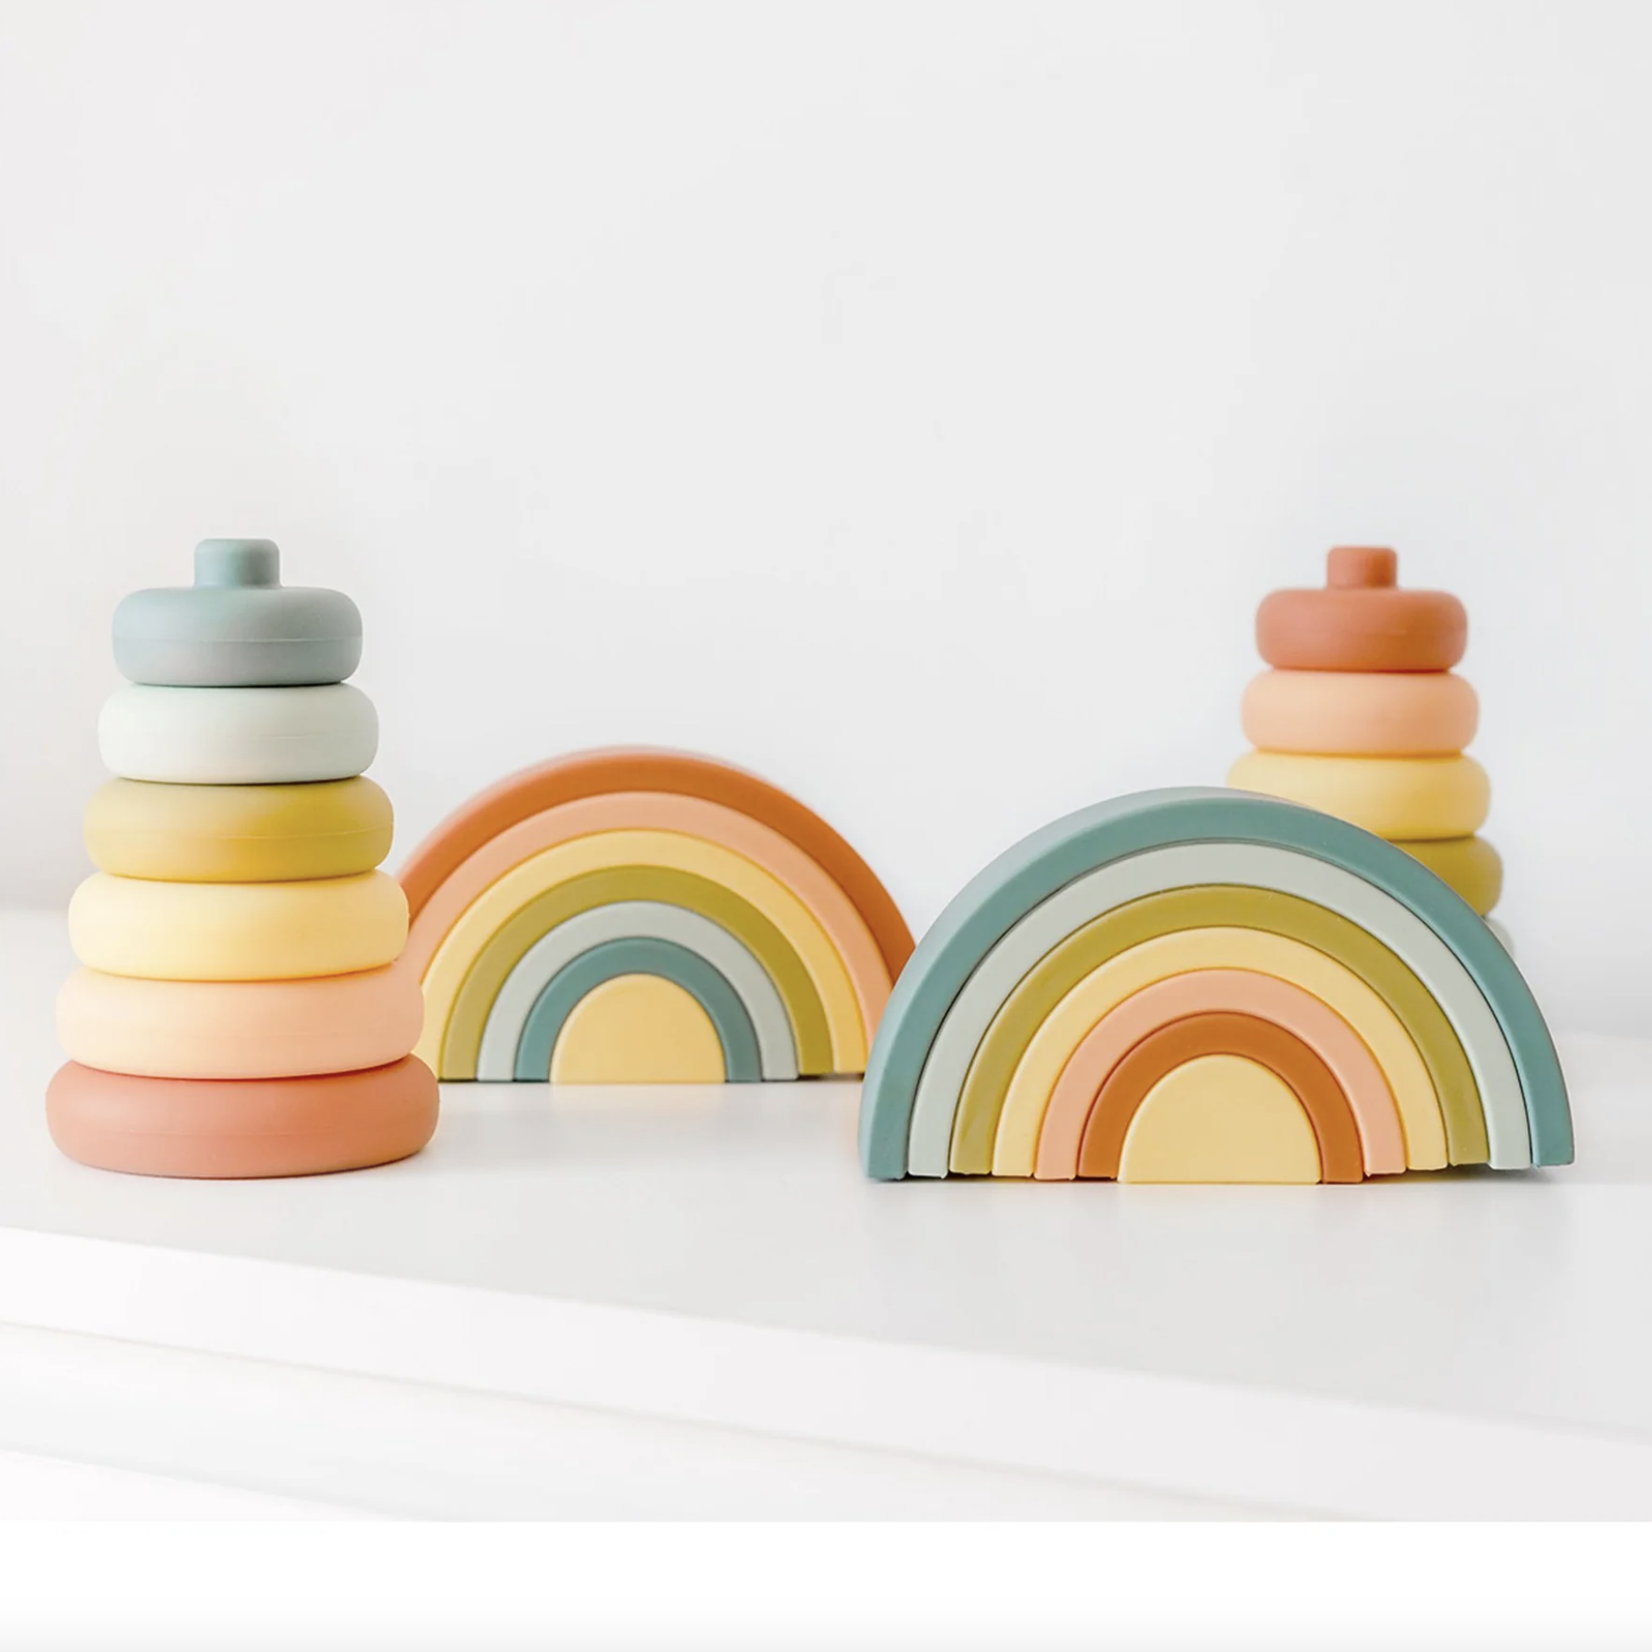 OB Designs Silicone Stacker Tower | Cherry